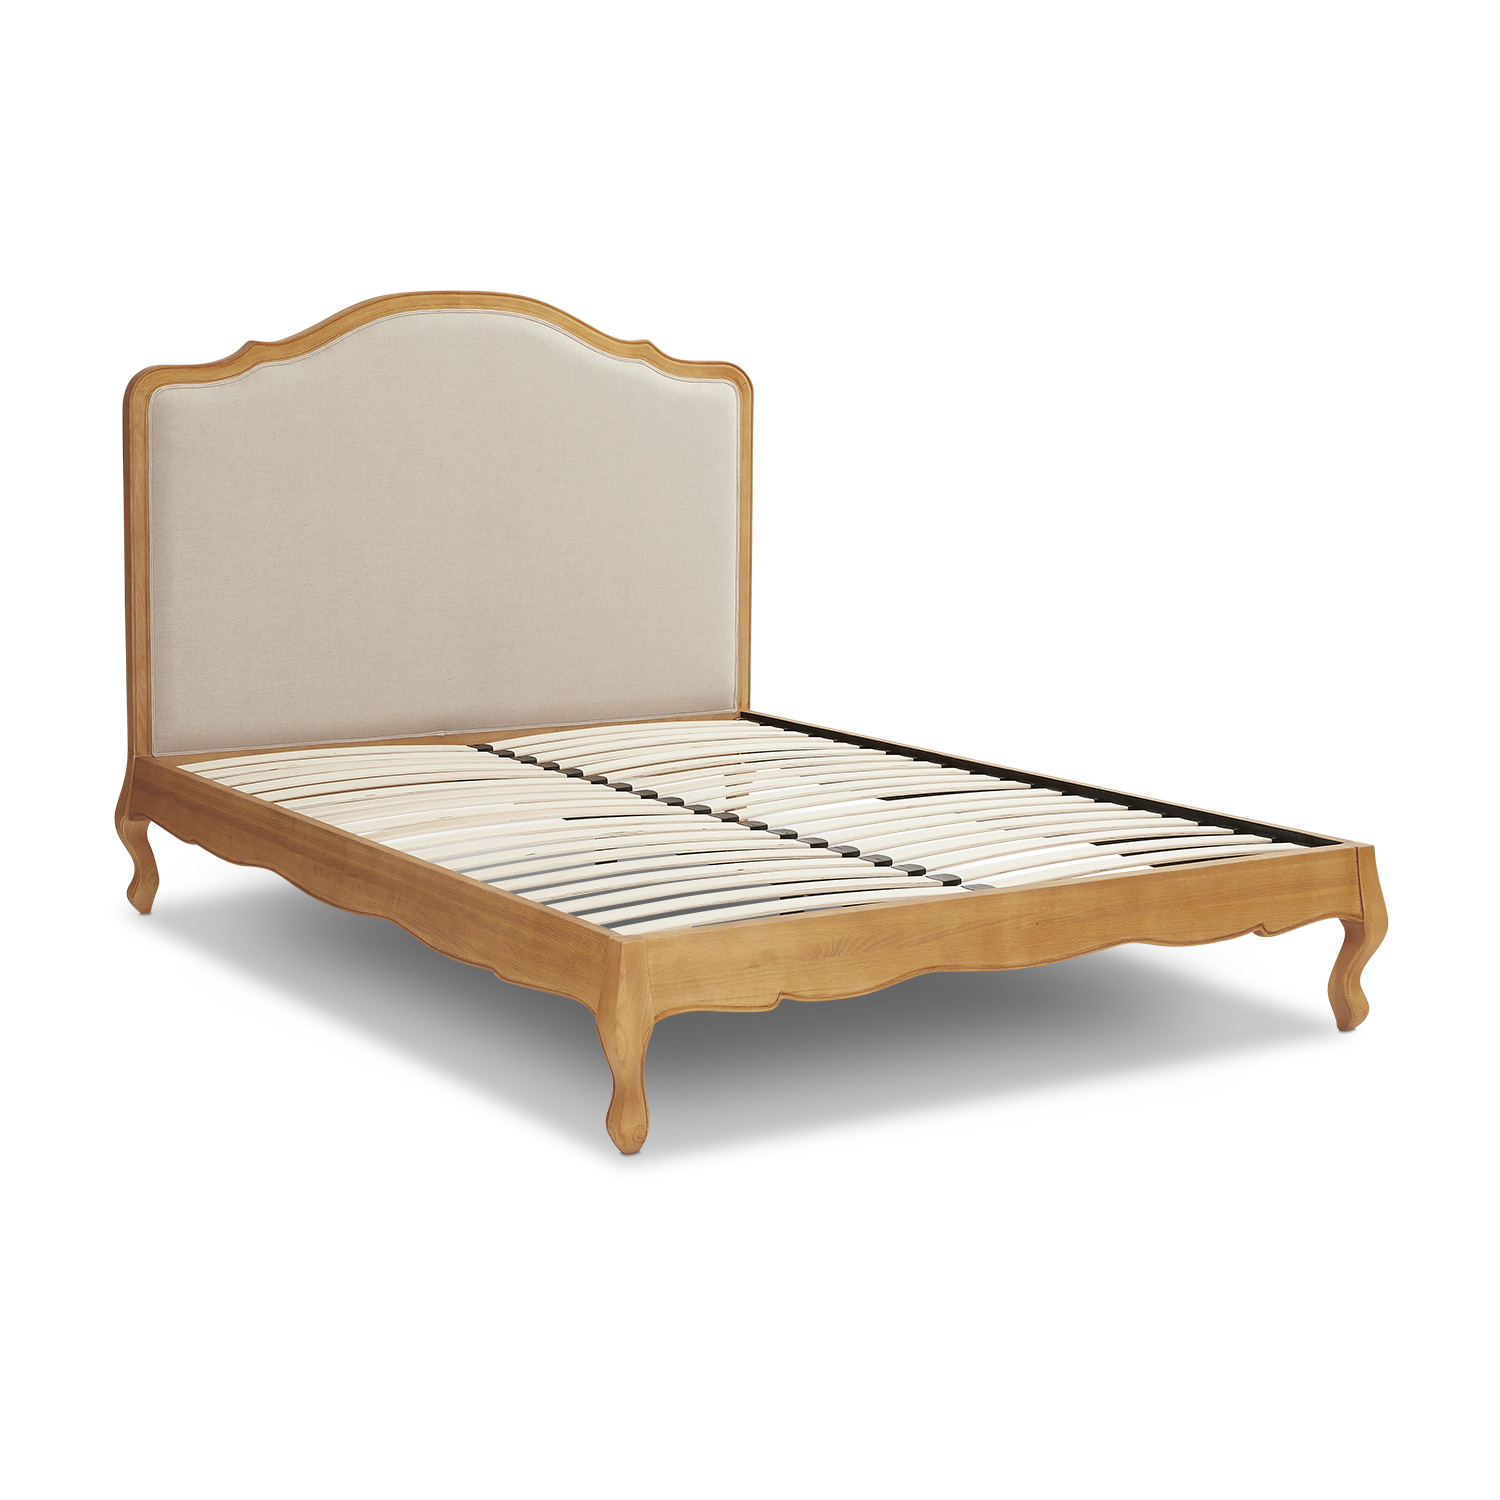 Alice – French Oak Upholstered Low Foot Board Bed – King Size